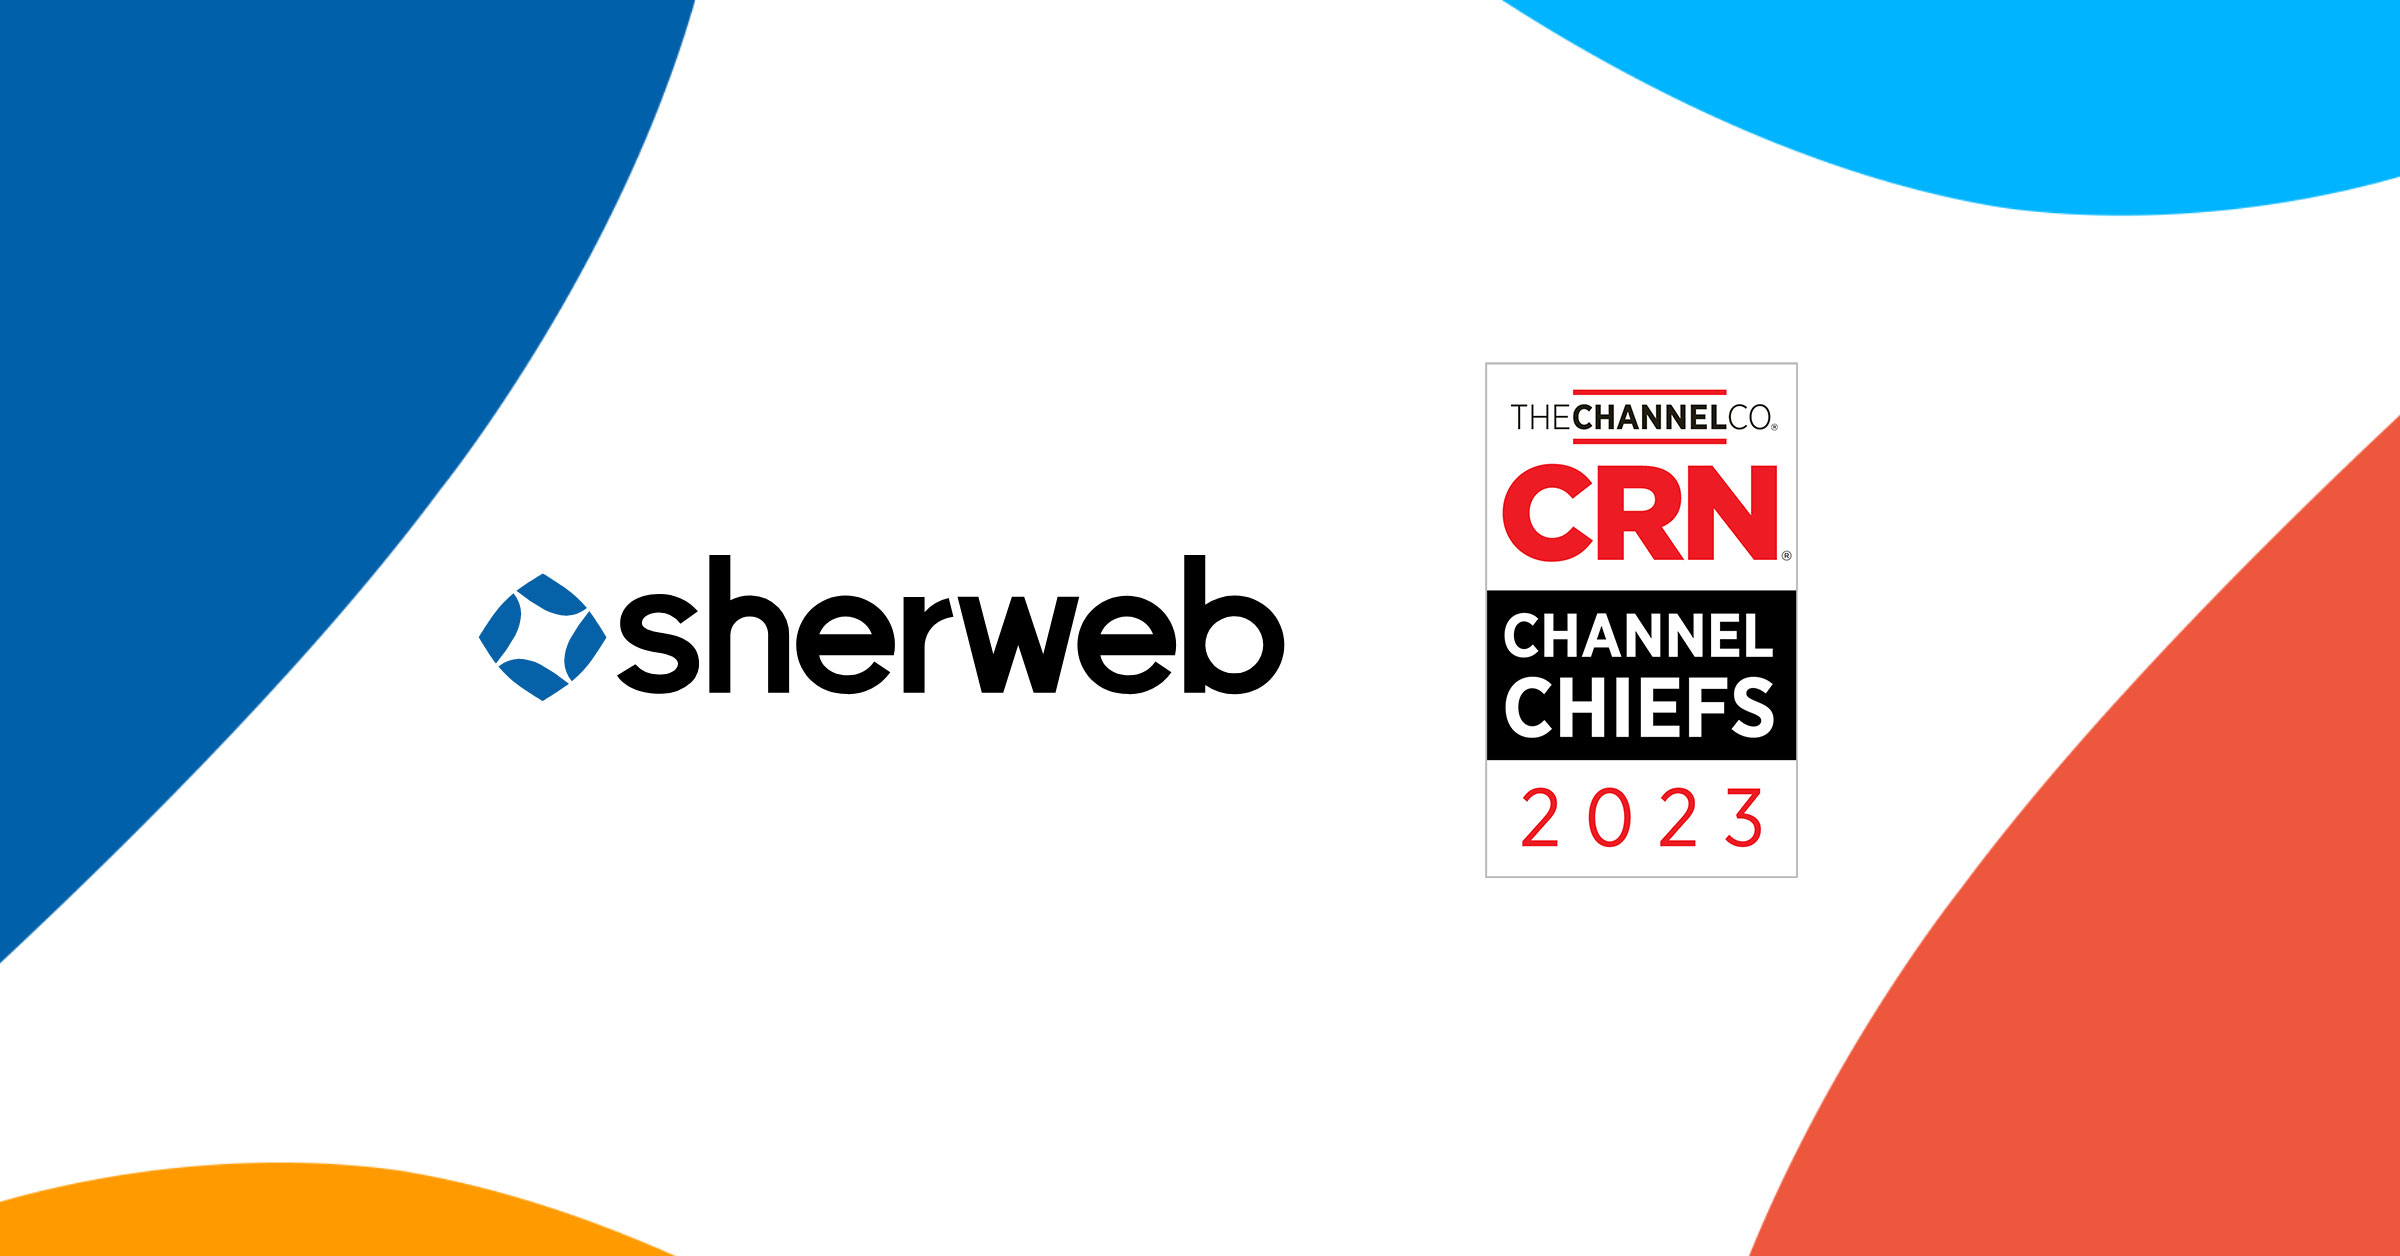 Three Sherweb executives recognized as 2023 CRN Channel Chiefs